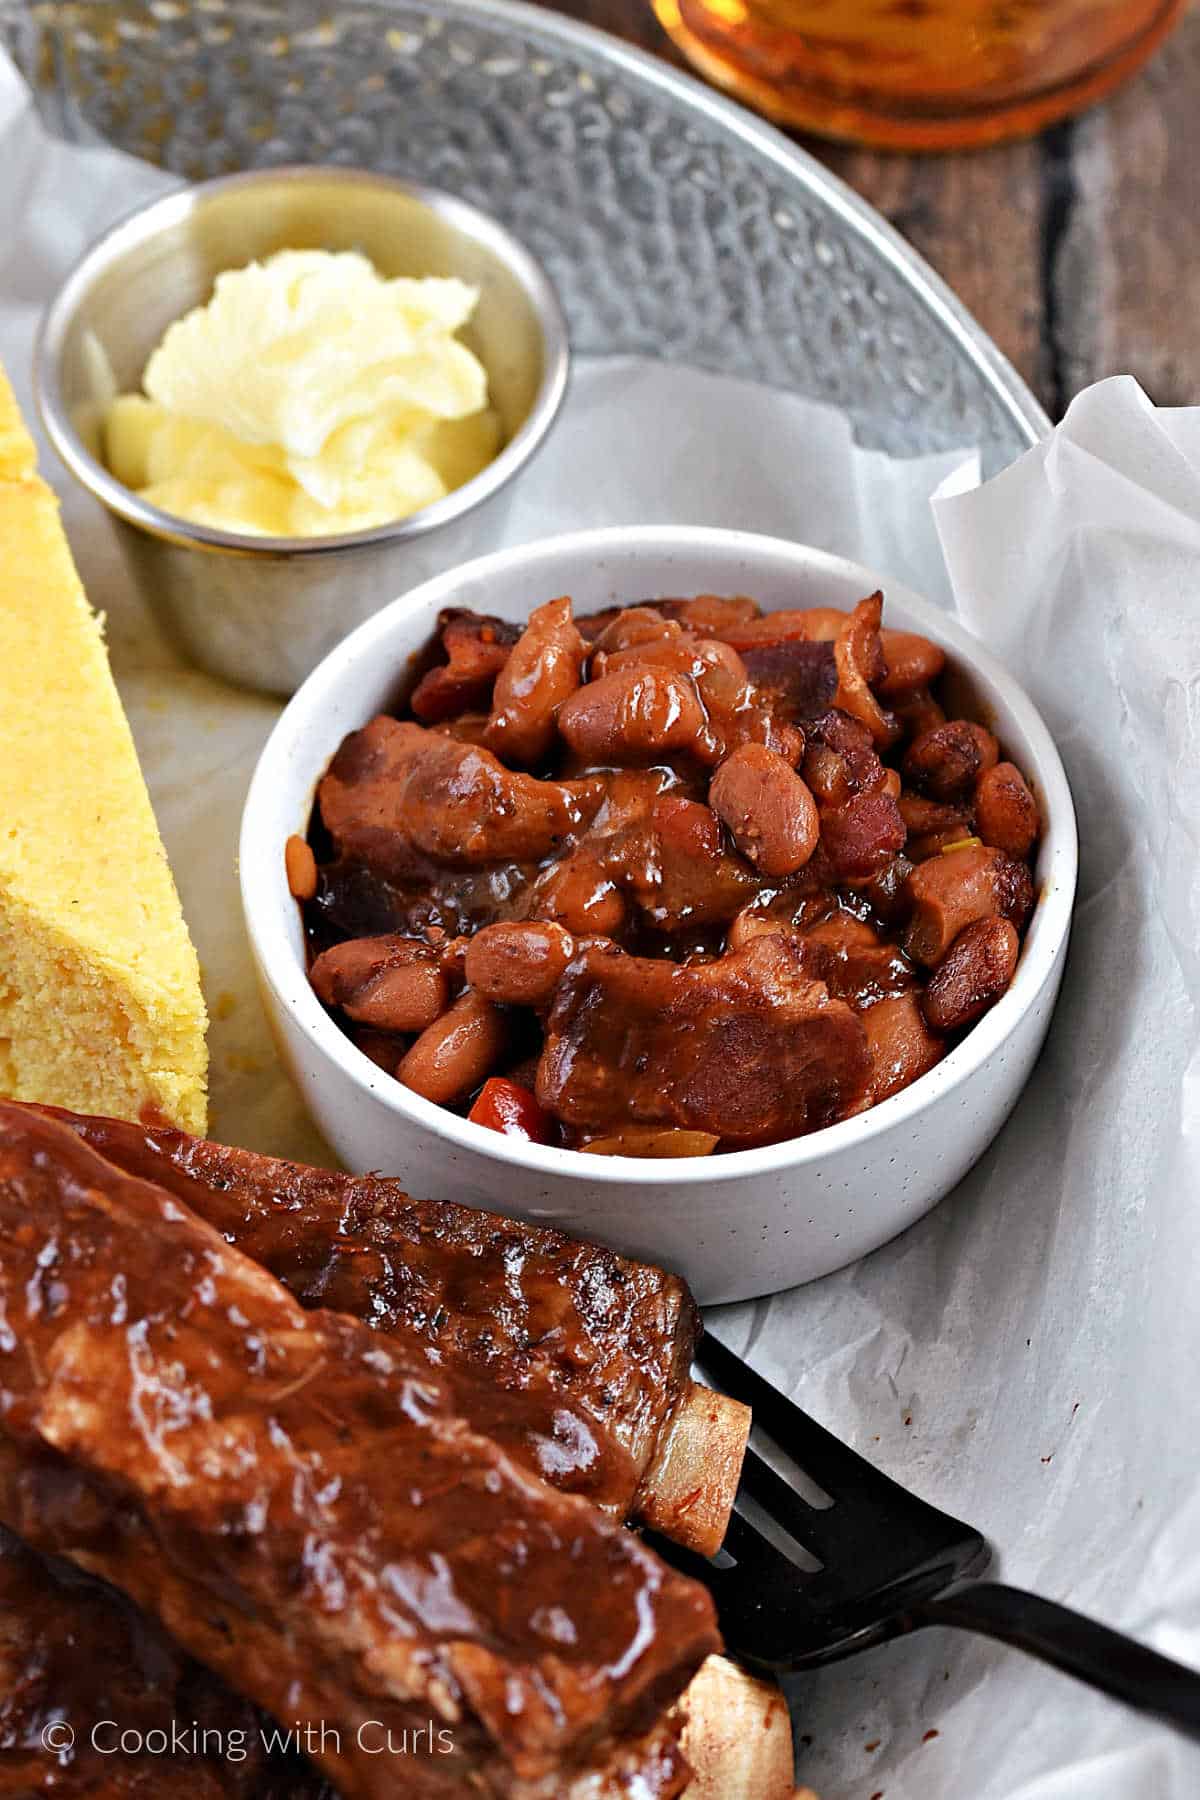 A small bowl of baked beans with chunks of bacon in a tray with barbecue ribs and cornbread.